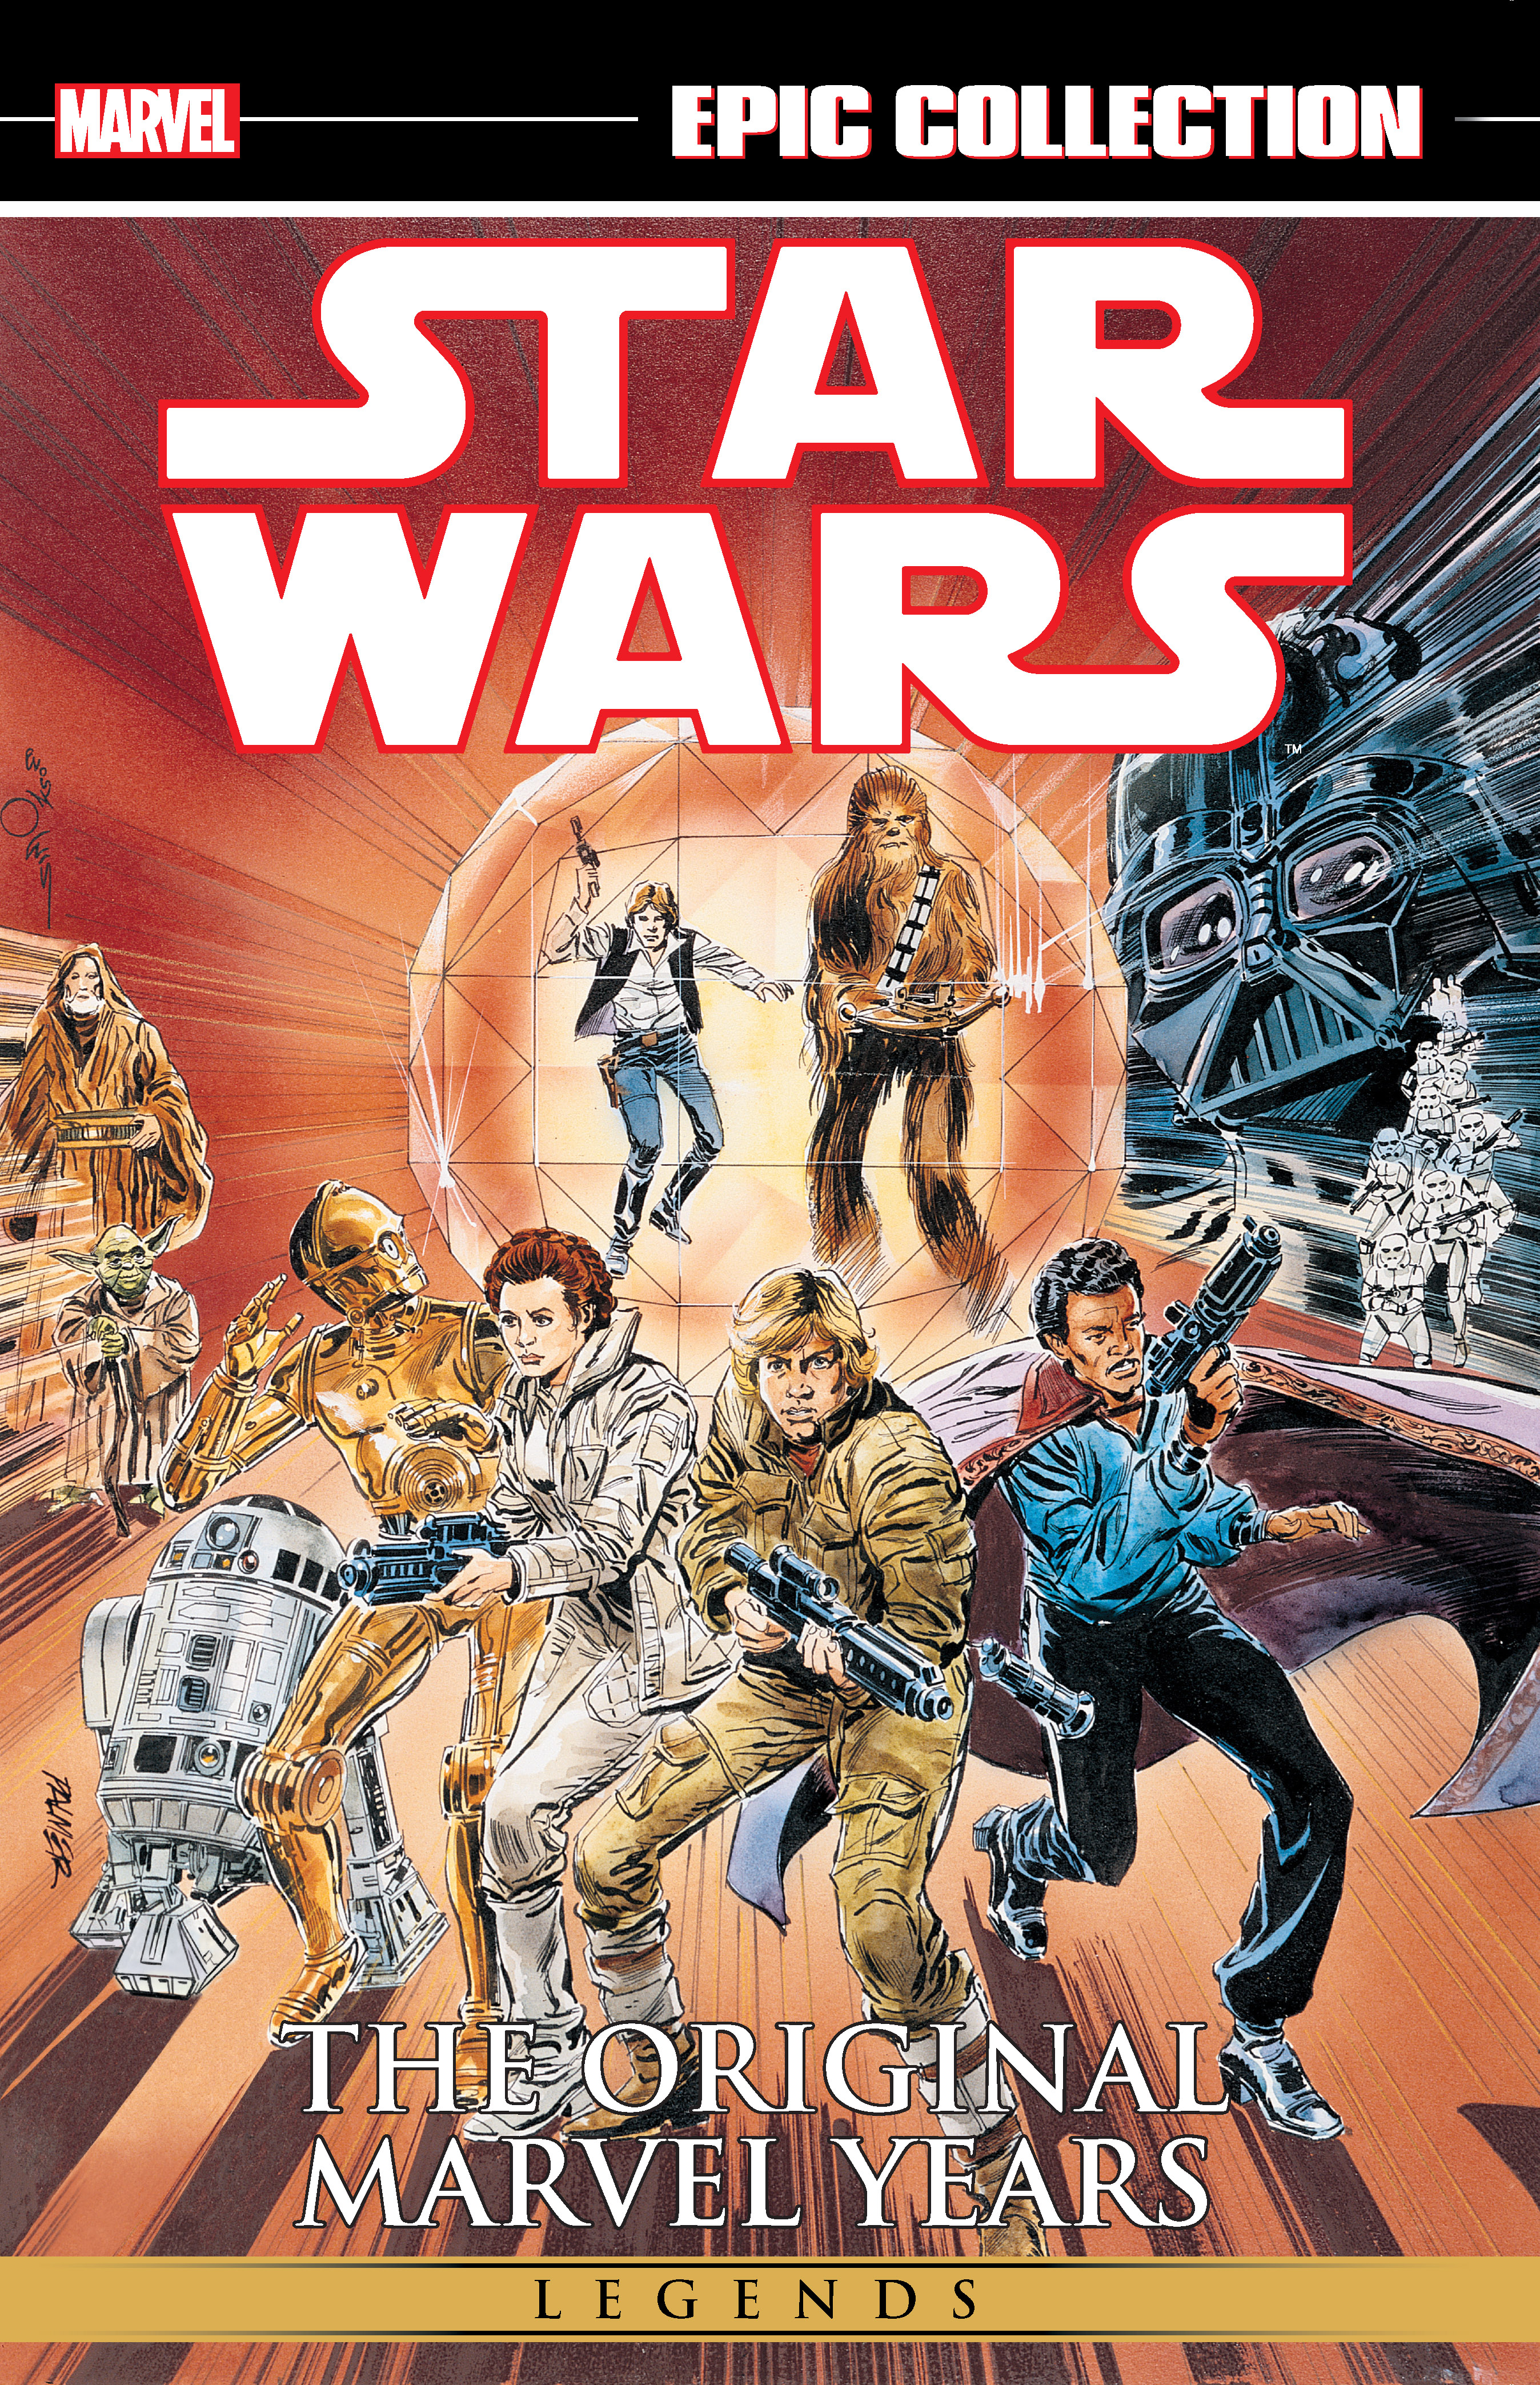 Star Wars Legends Epic Collection: The Original Marvel Years Vol. 3 (Trade Paperback)